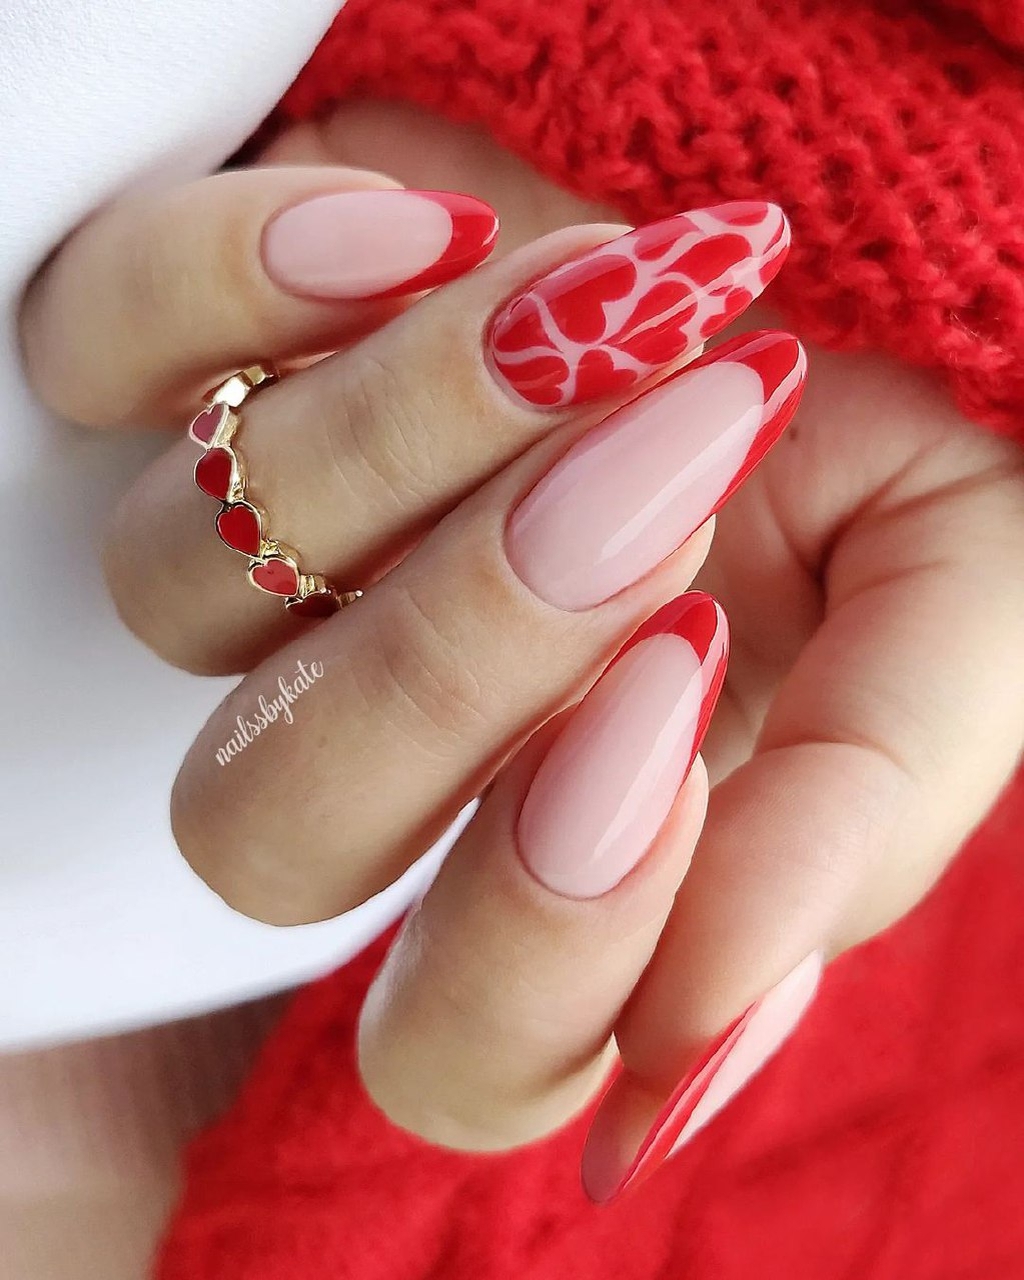 Unghie rosse con french - @nailssbykate